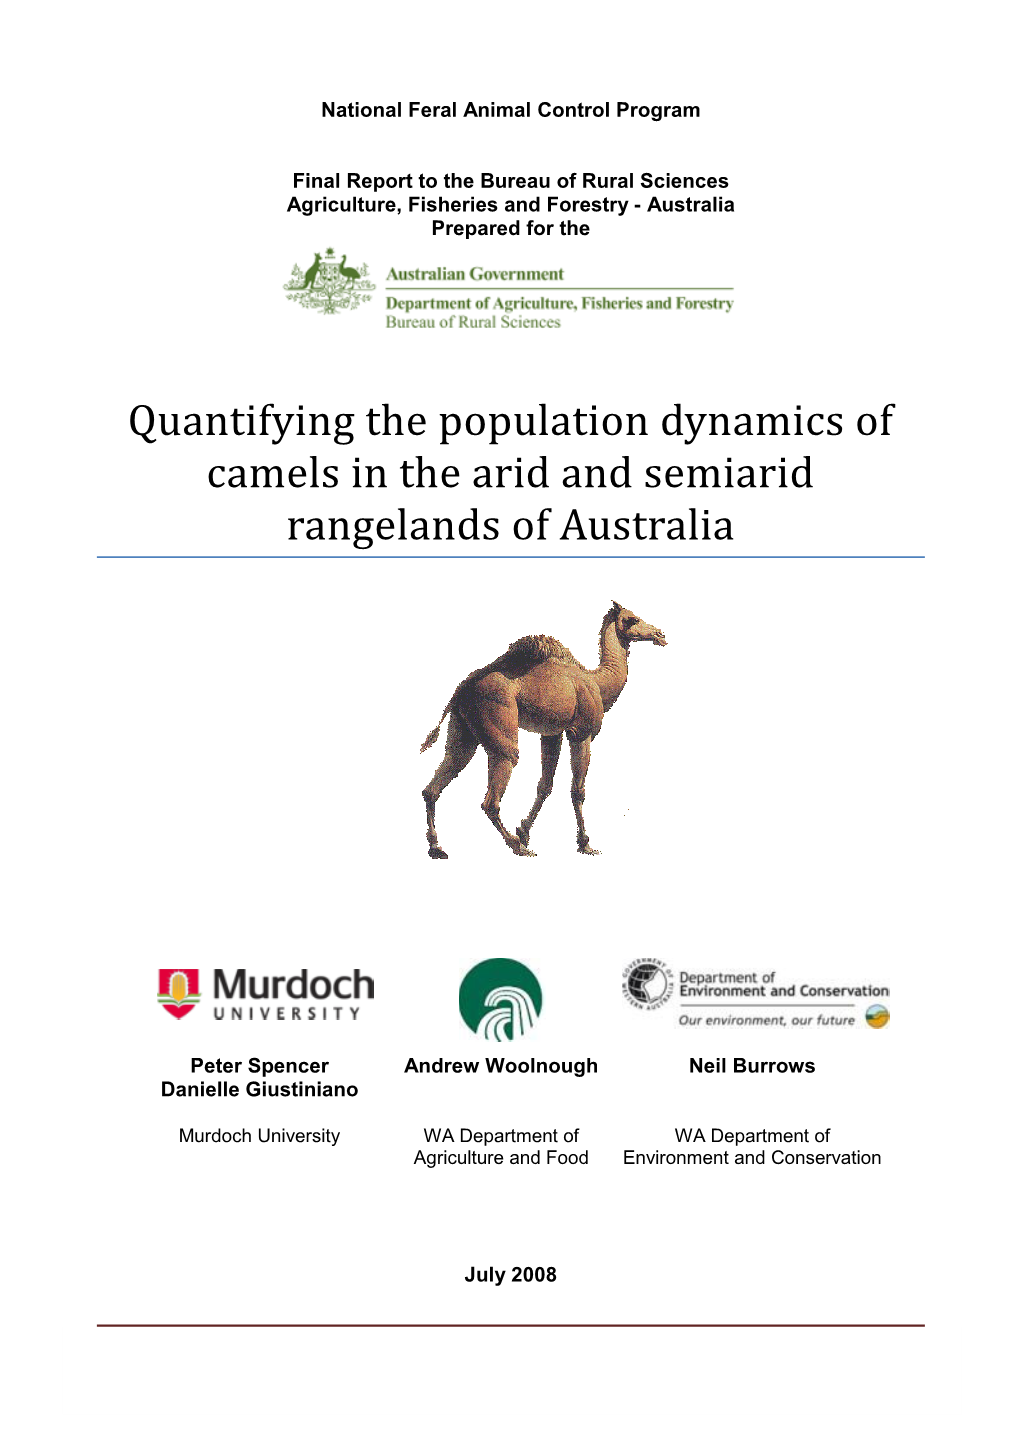 Quantifying the Population Dynamics of Camels in the Arid and Semiarid Rangelands of Australia